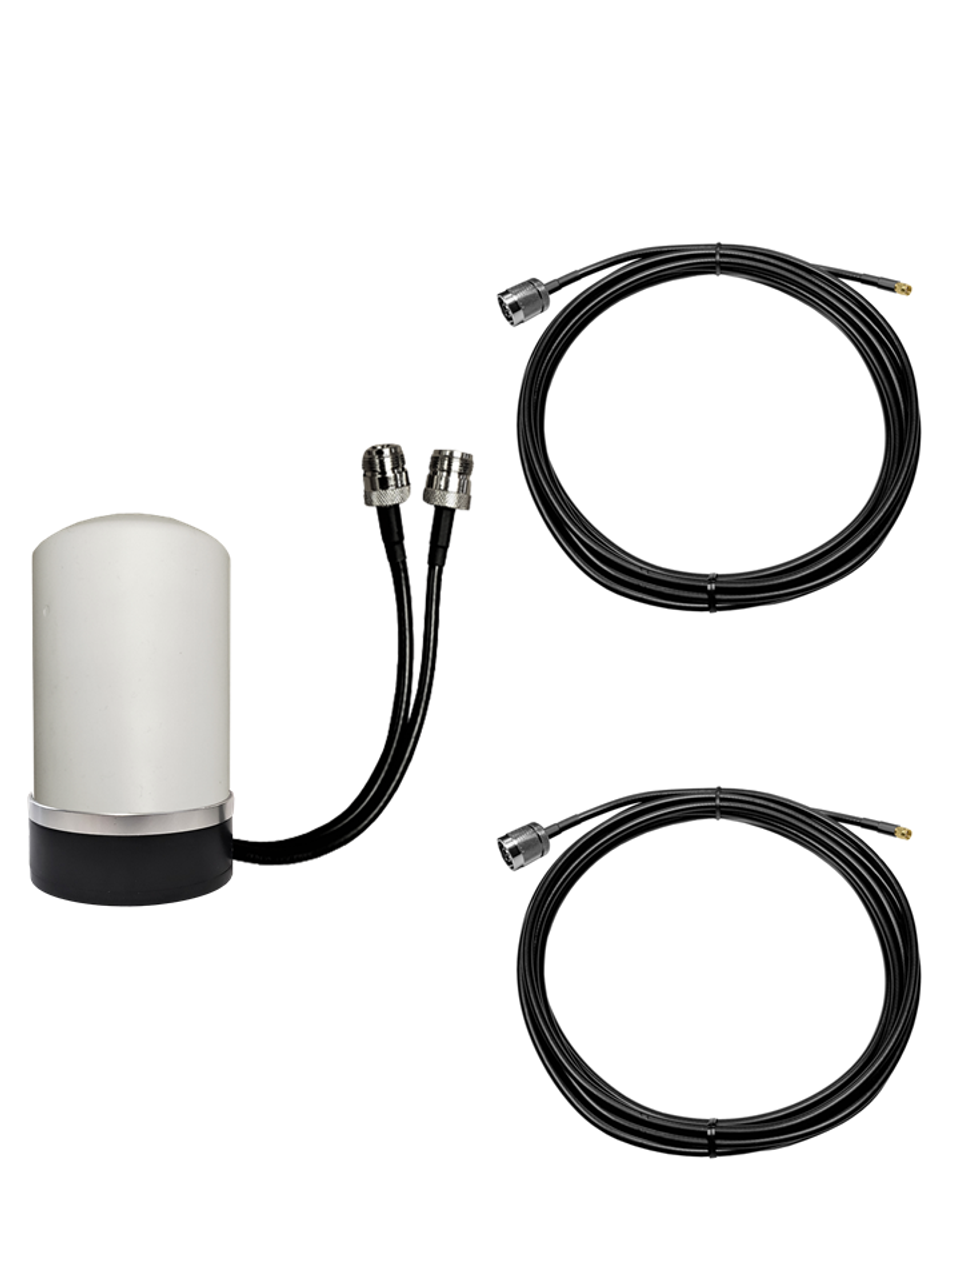 Cradlepoint R500-PLTE Antenna - M17M Omni Directional MIMO 2 x Cellular 4G LTE CBRS 5G NR IoT M2M Magnetic Mount Antenna w/Coax Cable Kit Options - N Male / SMA Male